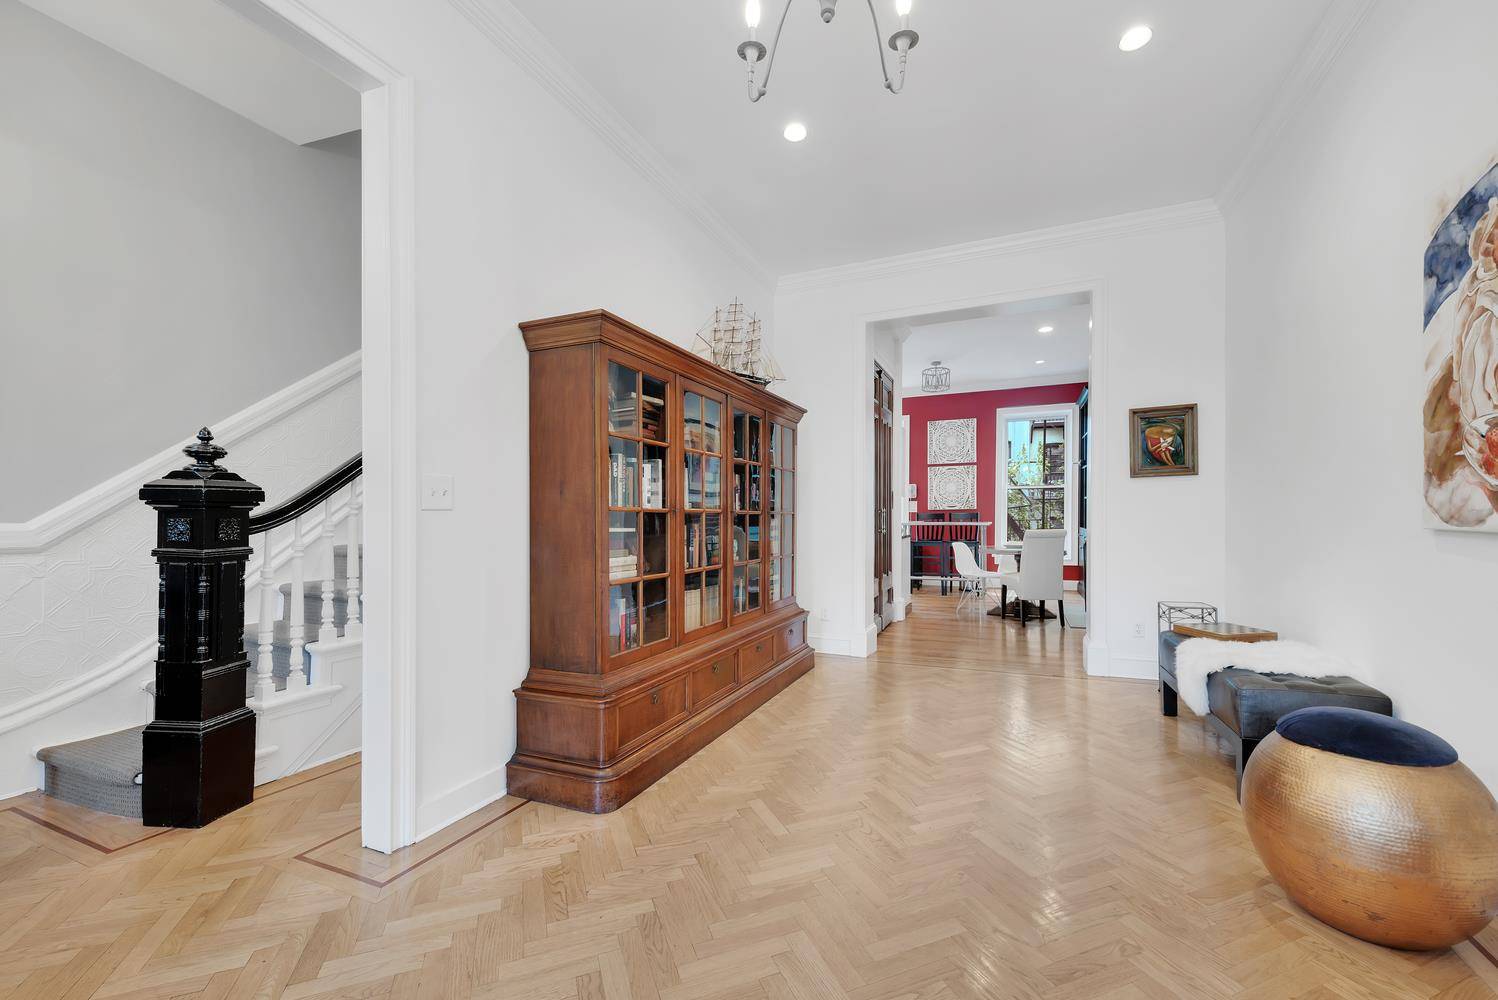 Quintessential brownstone living is yours at a meticulously renovated and updated circa 1900 gem, located on coveted tree lined 8th Street in prime Park Slope, which won 2 honorable mentions ...